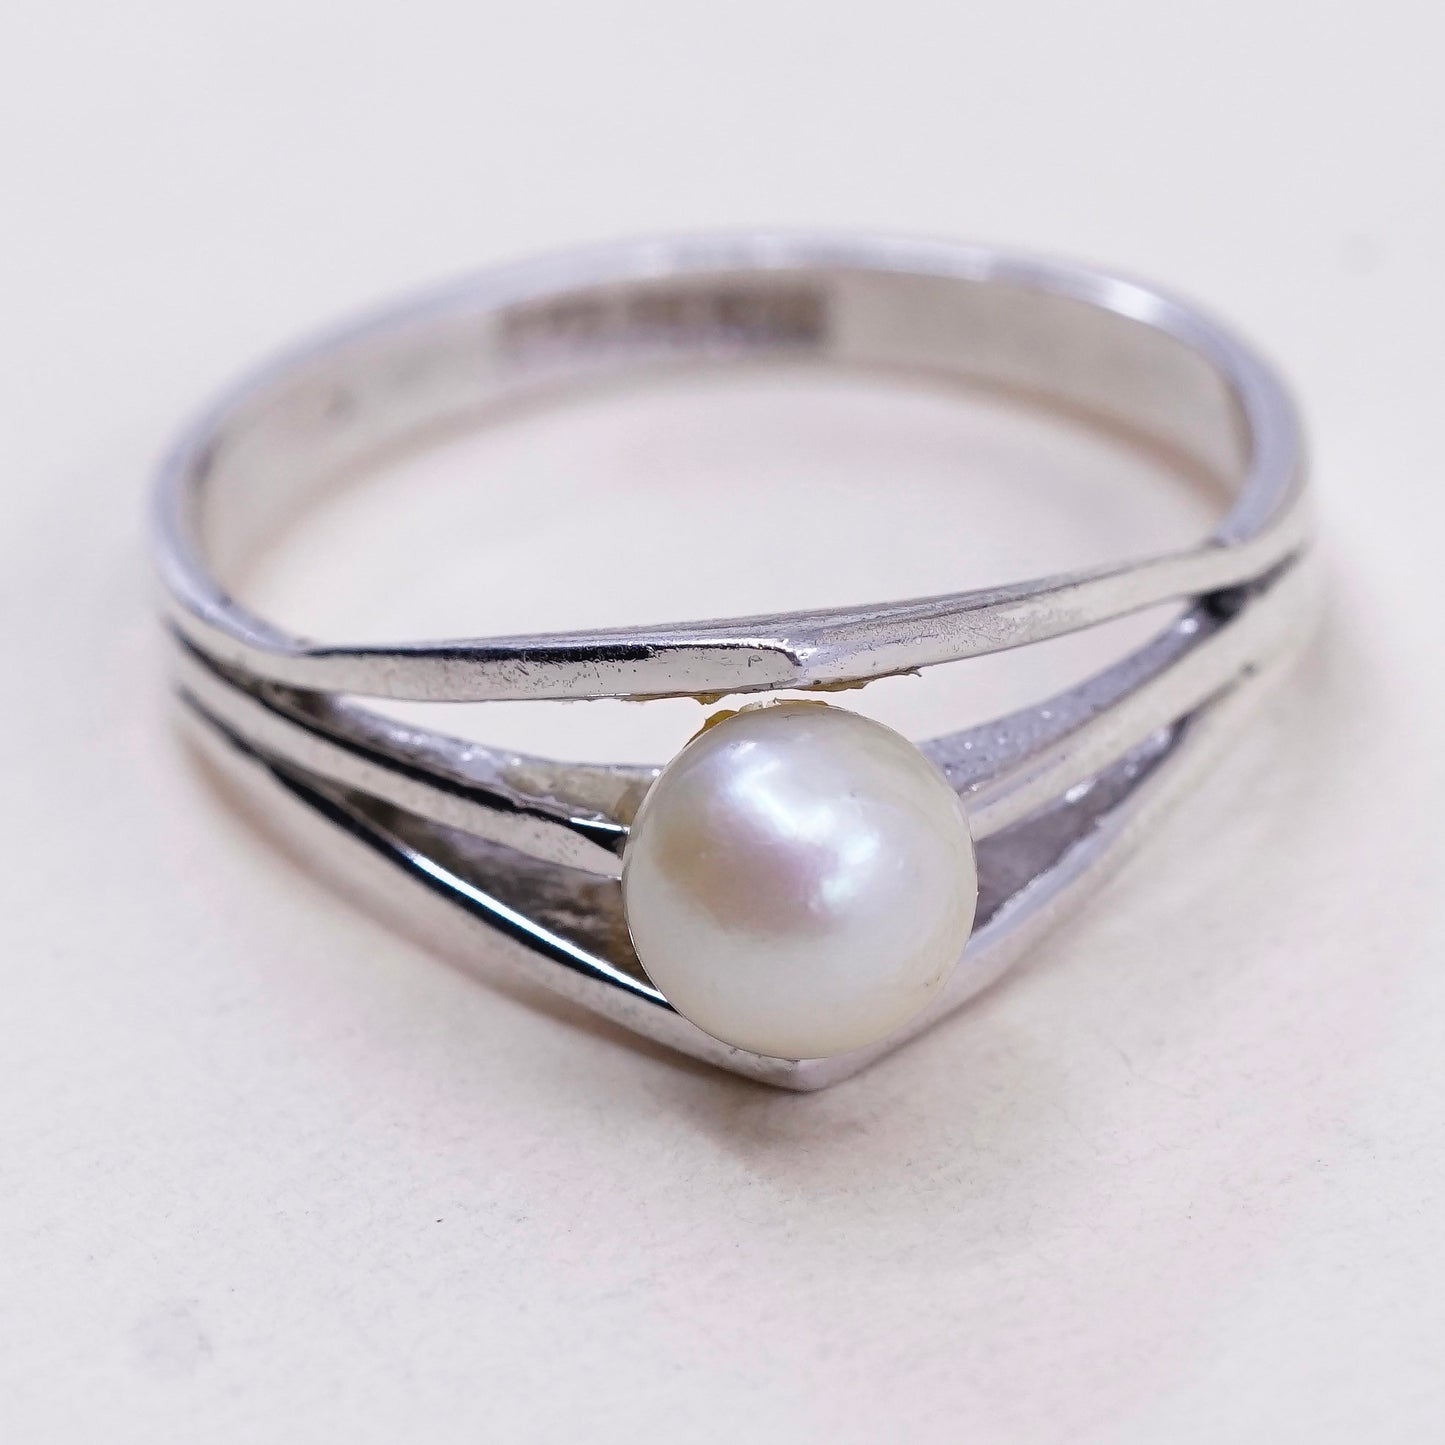 Size 8.25, vintage Sterling silver handmade ring, modern 925 band with pearl